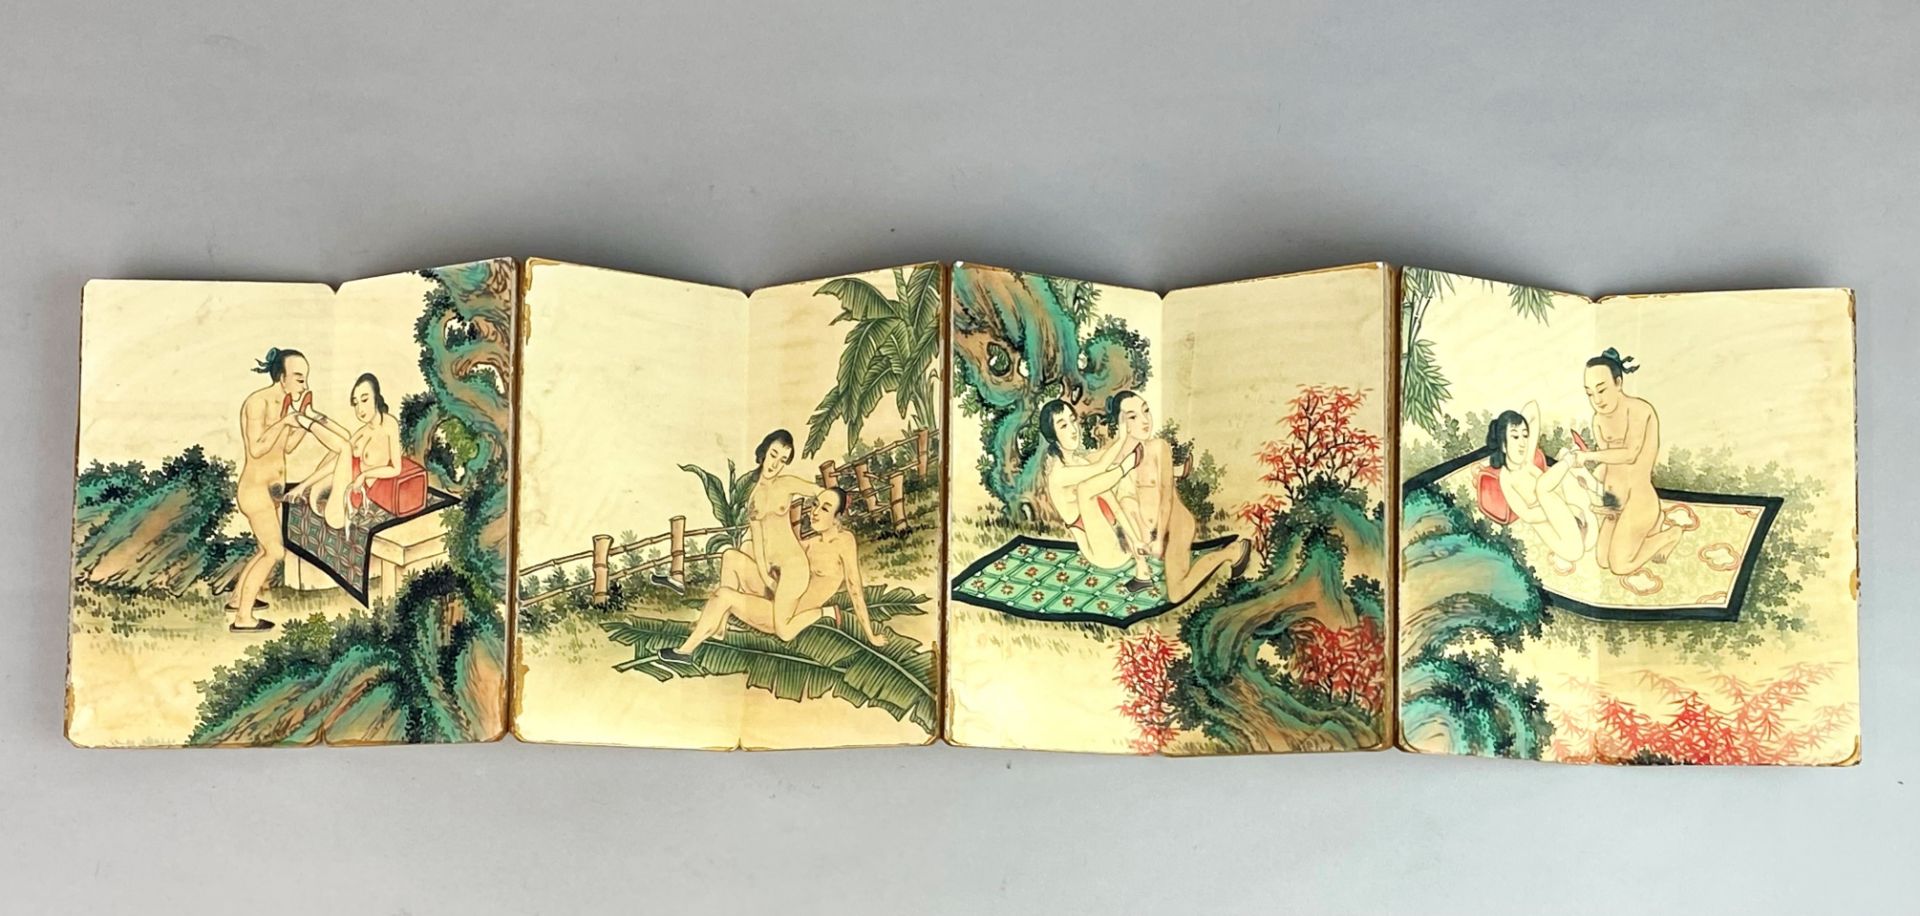 Two folding books of Chinese erotic pictures, largest size 18 x 12cm. Panels of larger book